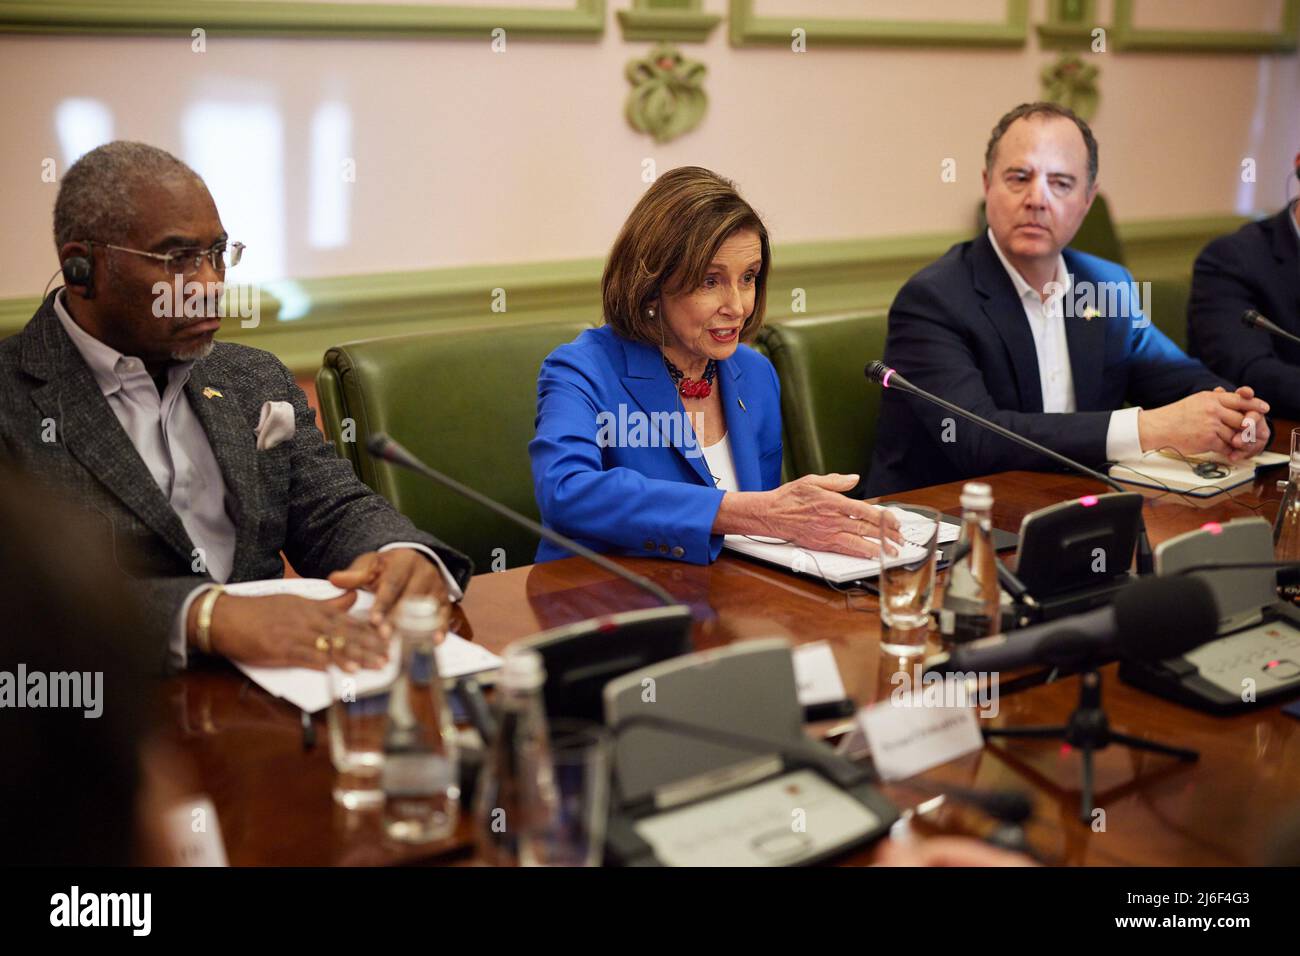 Kyiv, Ukraine. 01st May, 2022. U.S. Speaker Nancy Pelosi, center, with Rep. Gregory Meeks, left, and Rep. Adam Schiff, right, during a bilateral meeting with Ukrainian President Volodymyr Zelenskyy at the Mariyinsky palace, May 1, 2022 in Kyiv, Ukraine. Pelosi is the highest ranking elected U.S. official to visit Kyiv since the Russian invasion. Credit: Ukraine Presidency/Ukraine Presidency/Alamy Live News Stock Photo